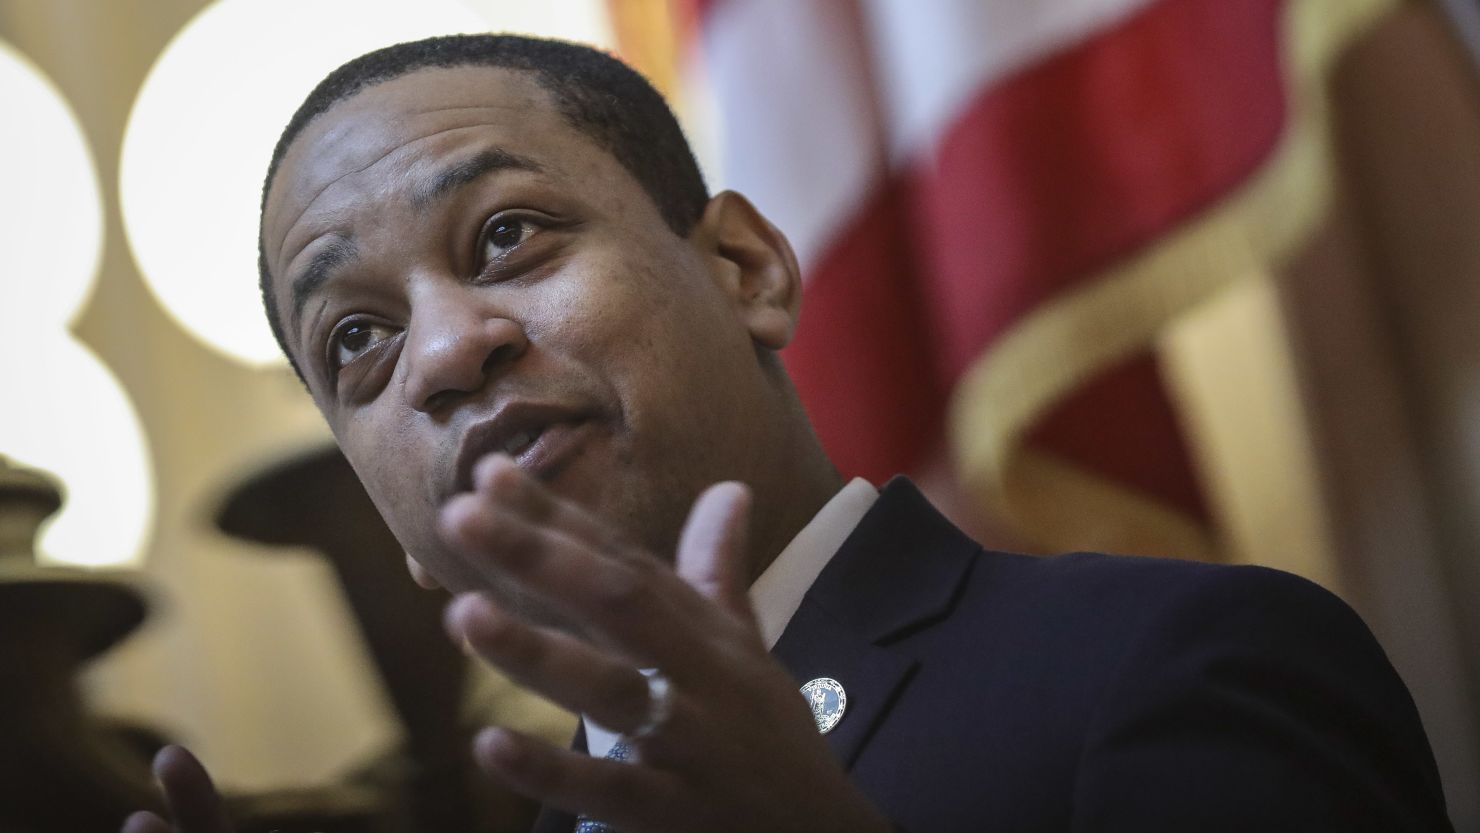 In this February 7, 2019, file photo, Lt. Gov. Justin Fairfax presides over the state Senate at the Virginia State Capitol in Richmond.